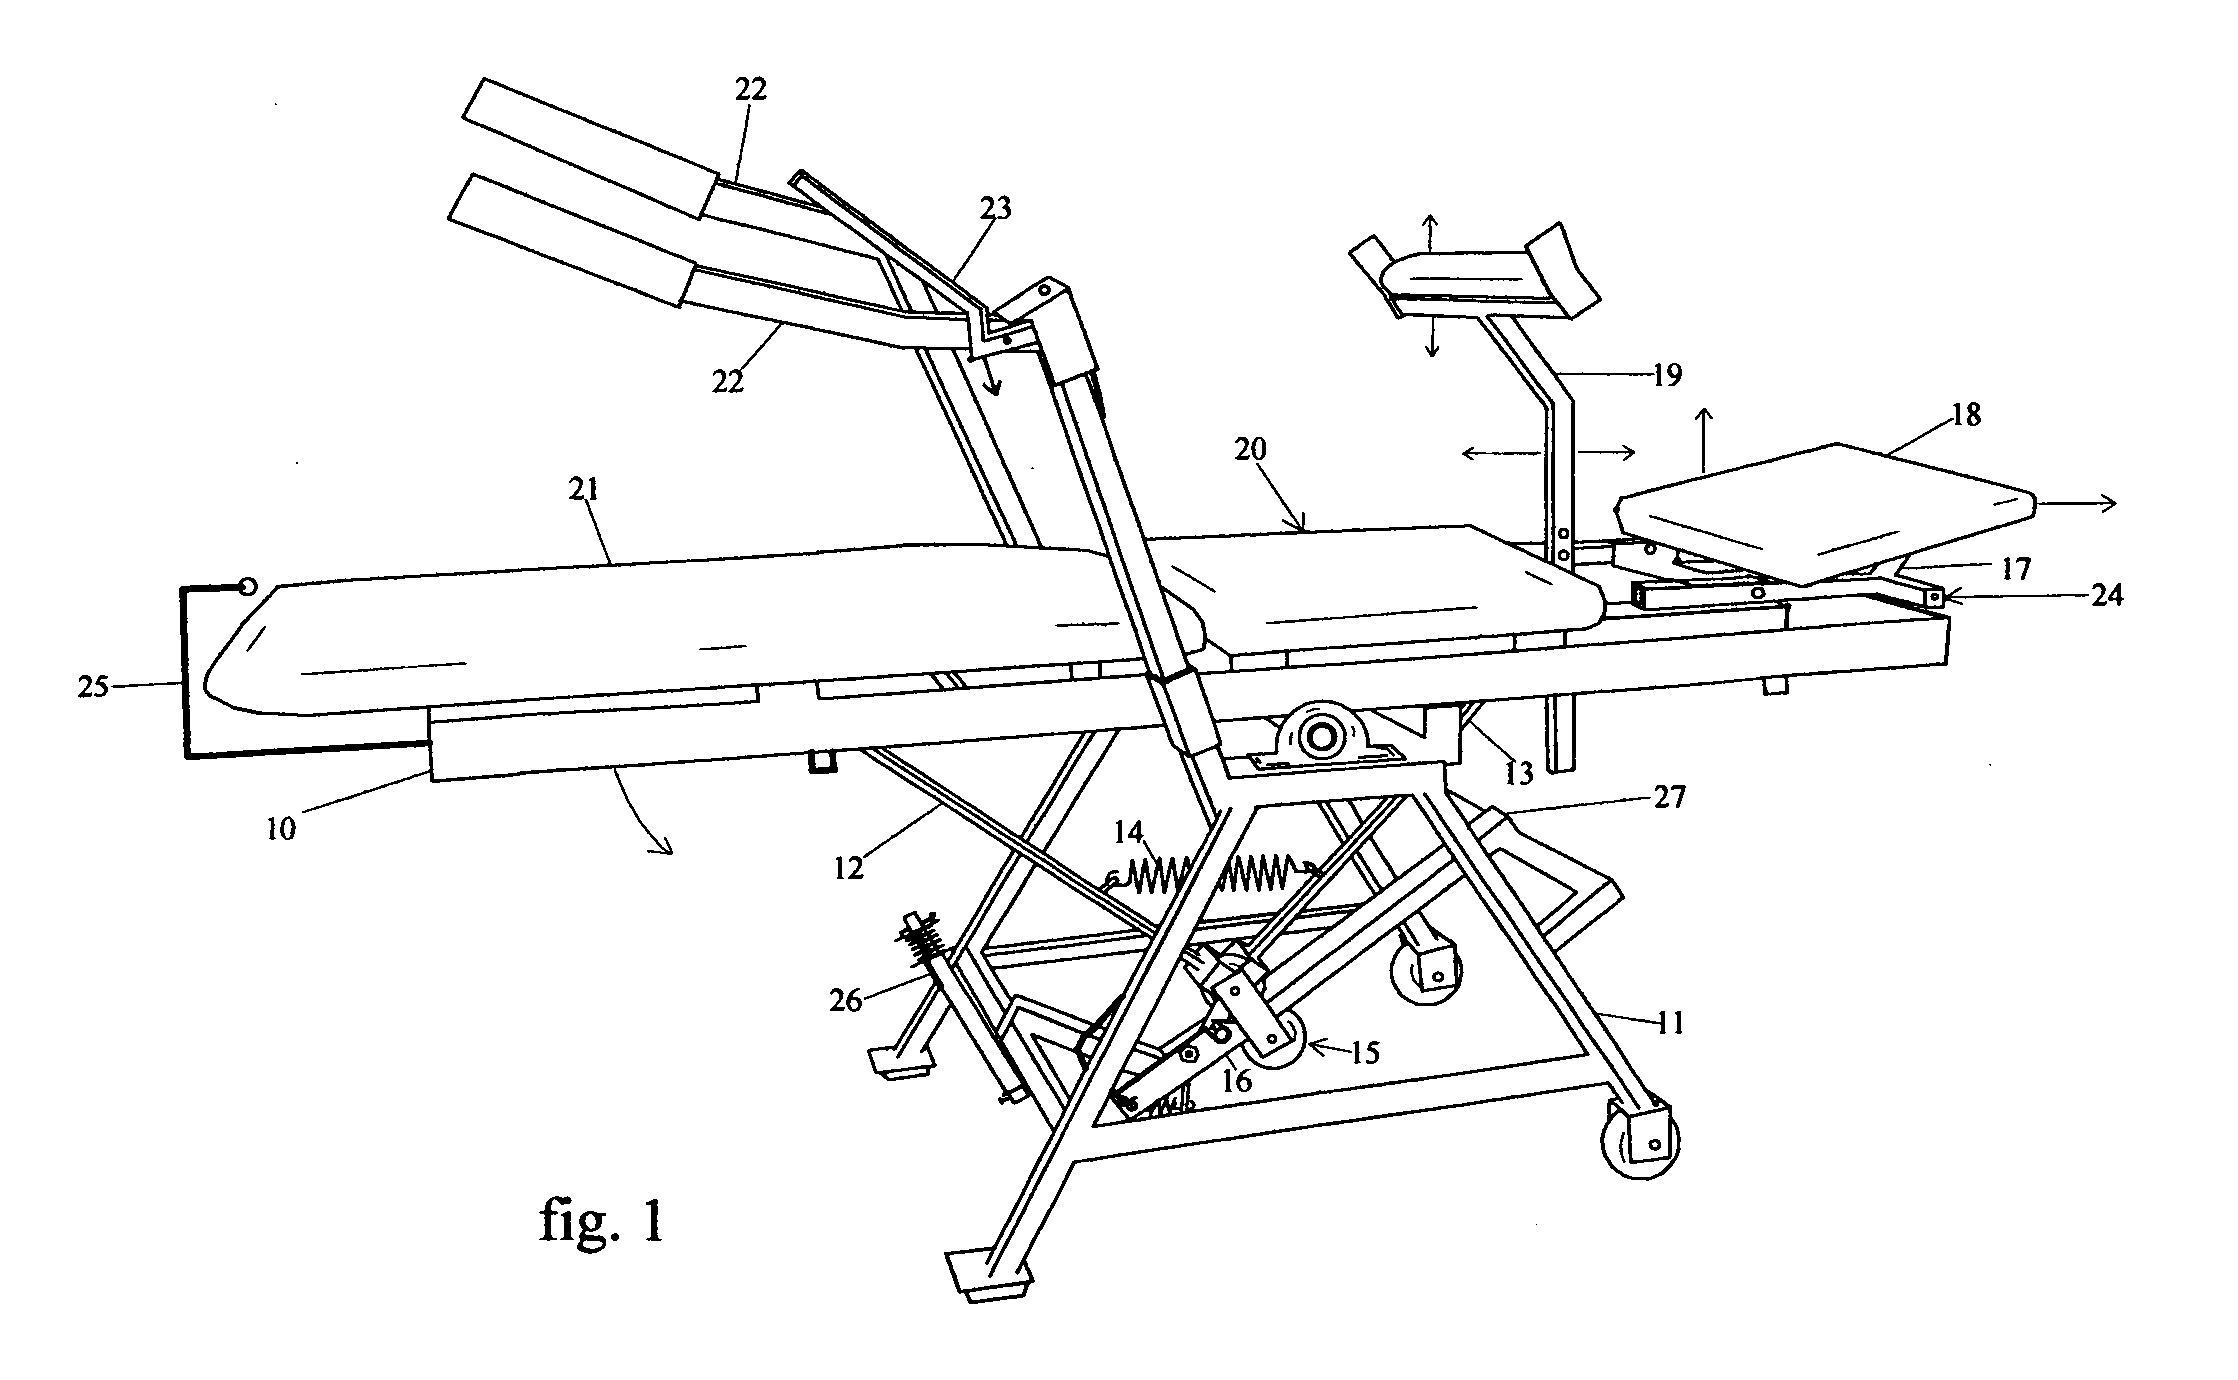 Therapeutic, tilting, split table, traction apparatus for home, office ,or workplace use, manually operated by the user / person, to relieve back pain and /or stretch, lumbar /spine / back muscles before and / or after athletic activity ,bending or lifting type work or sitting all day .Traction / distraction, may be applied, intermittently, using an on-off cycle, or continuously.